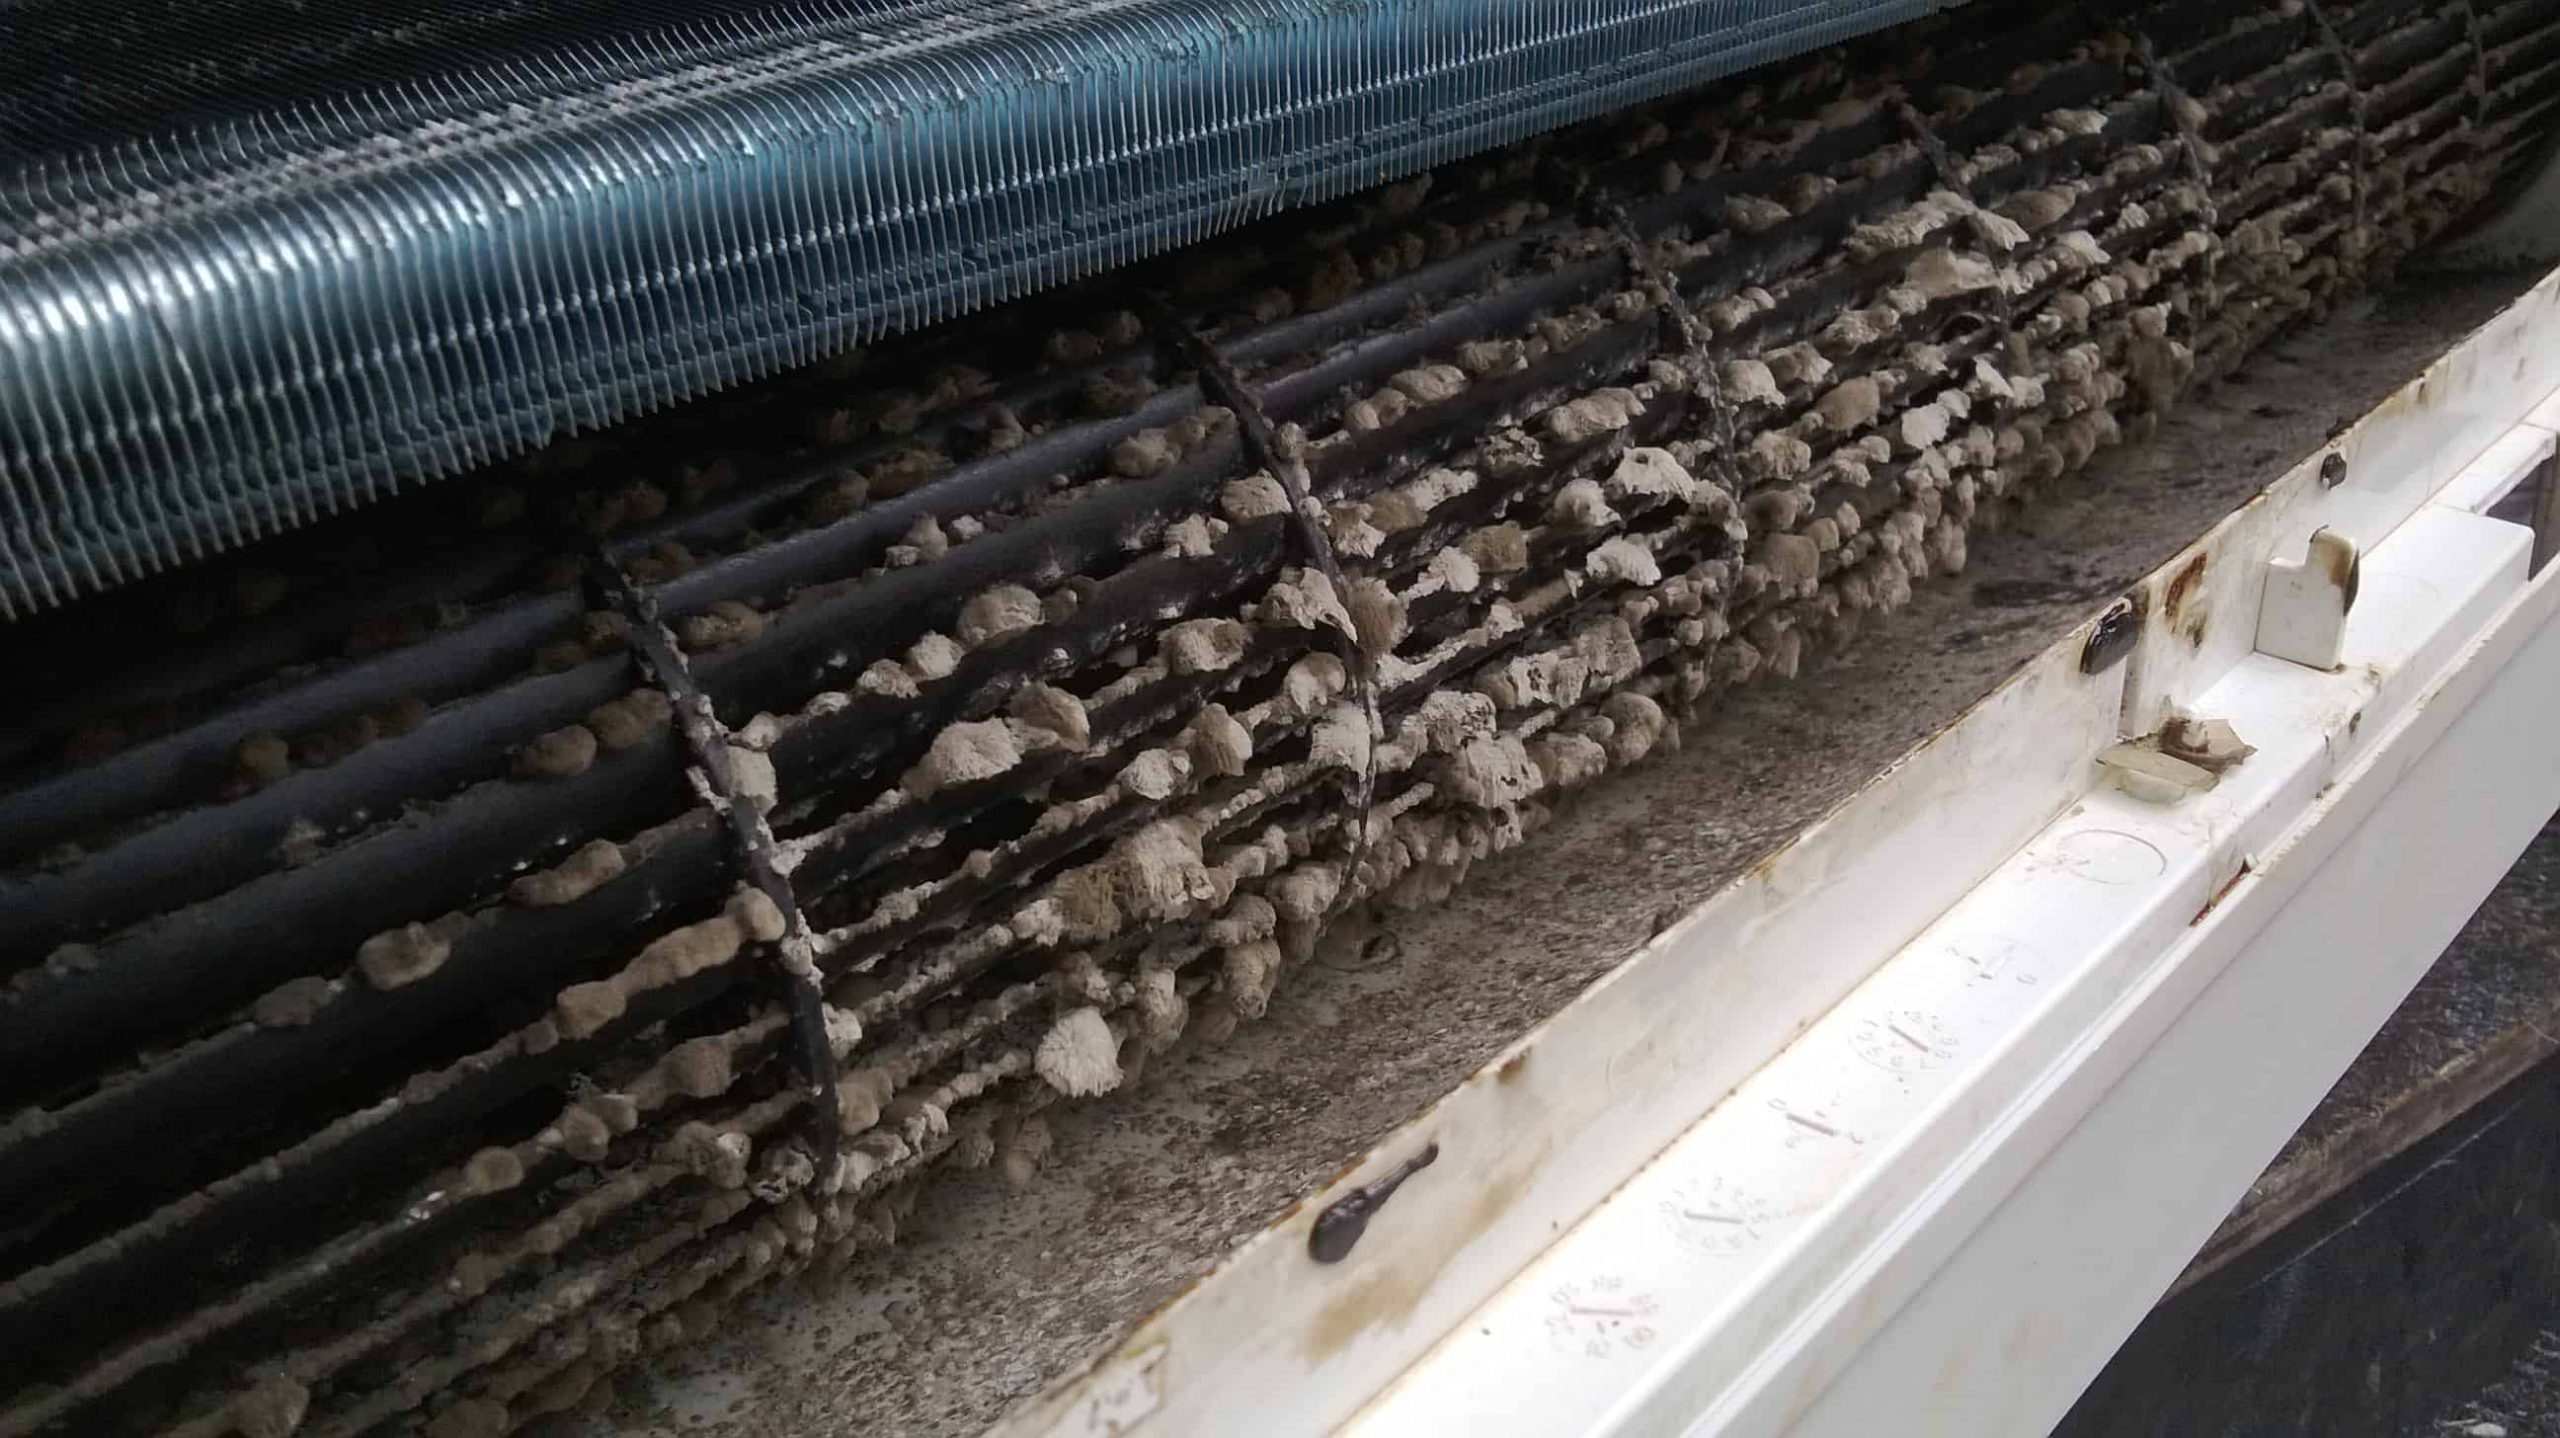 Mould Removal Singapore - Mouldgone Professional Mould AC Ckeaning